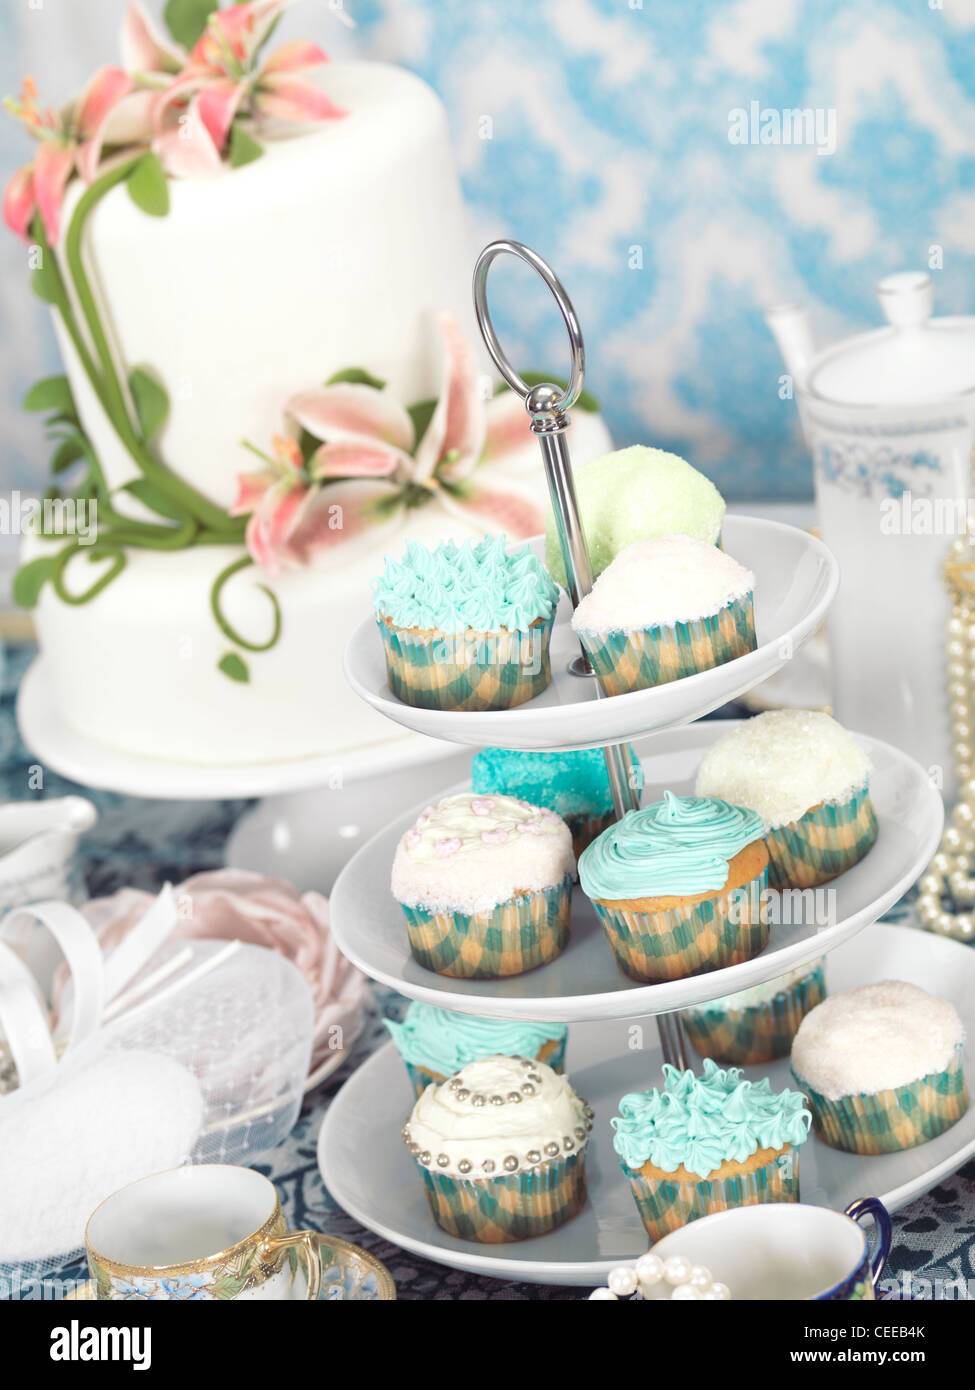 Food still life photo of cupcakes, china and a cake on a table Stock Photo